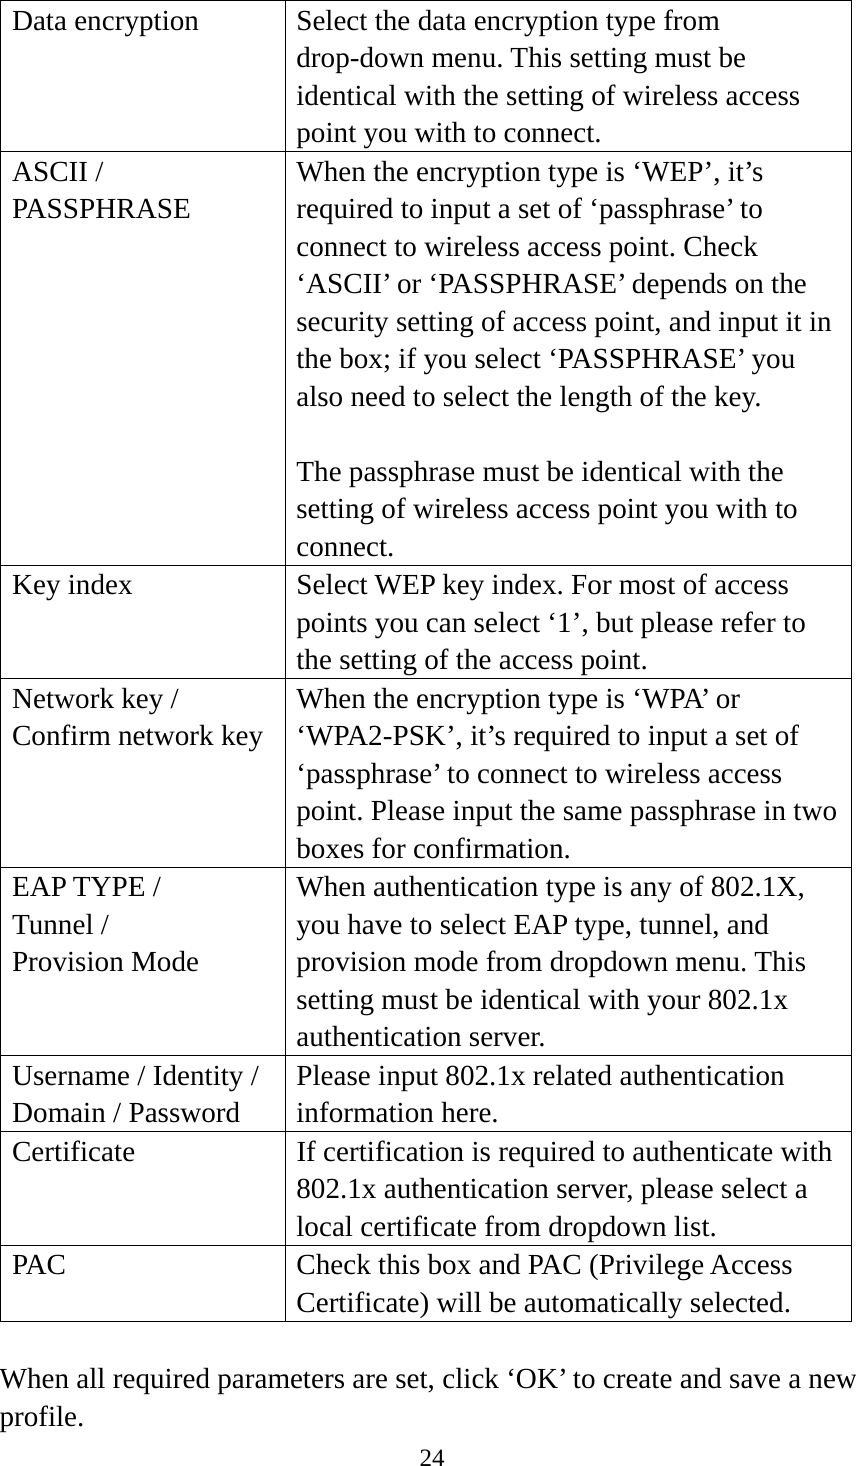 24  Data encryption  Select the data encryption type from drop-down menu. This setting must be identical with the setting of wireless access point you with to connect. ASCII / PASSPHRASE When the encryption type is ‘WEP’, it’s required to input a set of ‘passphrase’ to connect to wireless access point. Check ‘ASCII’ or ‘PASSPHRASE’ depends on the security setting of access point, and input it in the box; if you select ‘PASSPHRASE’ you also need to select the length of the key.  The passphrase must be identical with the setting of wireless access point you with to connect. Key index  Select WEP key index. For most of access points you can select ‘1’, but please refer to the setting of the access point. Network key / Confirm network key When the encryption type is ‘WPA’ or ‘WPA2-PSK’, it’s required to input a set of ‘passphrase’ to connect to wireless access point. Please input the same passphrase in two boxes for confirmation. EAP TYPE / Tunnel / Provision Mode When authentication type is any of 802.1X, you have to select EAP type, tunnel, and provision mode from dropdown menu. This setting must be identical with your 802.1x authentication server. Username / Identity / Domain / Password Please input 802.1x related authentication information here.   Certificate  If certification is required to authenticate with 802.1x authentication server, please select a local certificate from dropdown list. PAC  Check this box and PAC (Privilege Access Certificate) will be automatically selected.  When all required parameters are set, click ‘OK’ to create and save a new profile.  